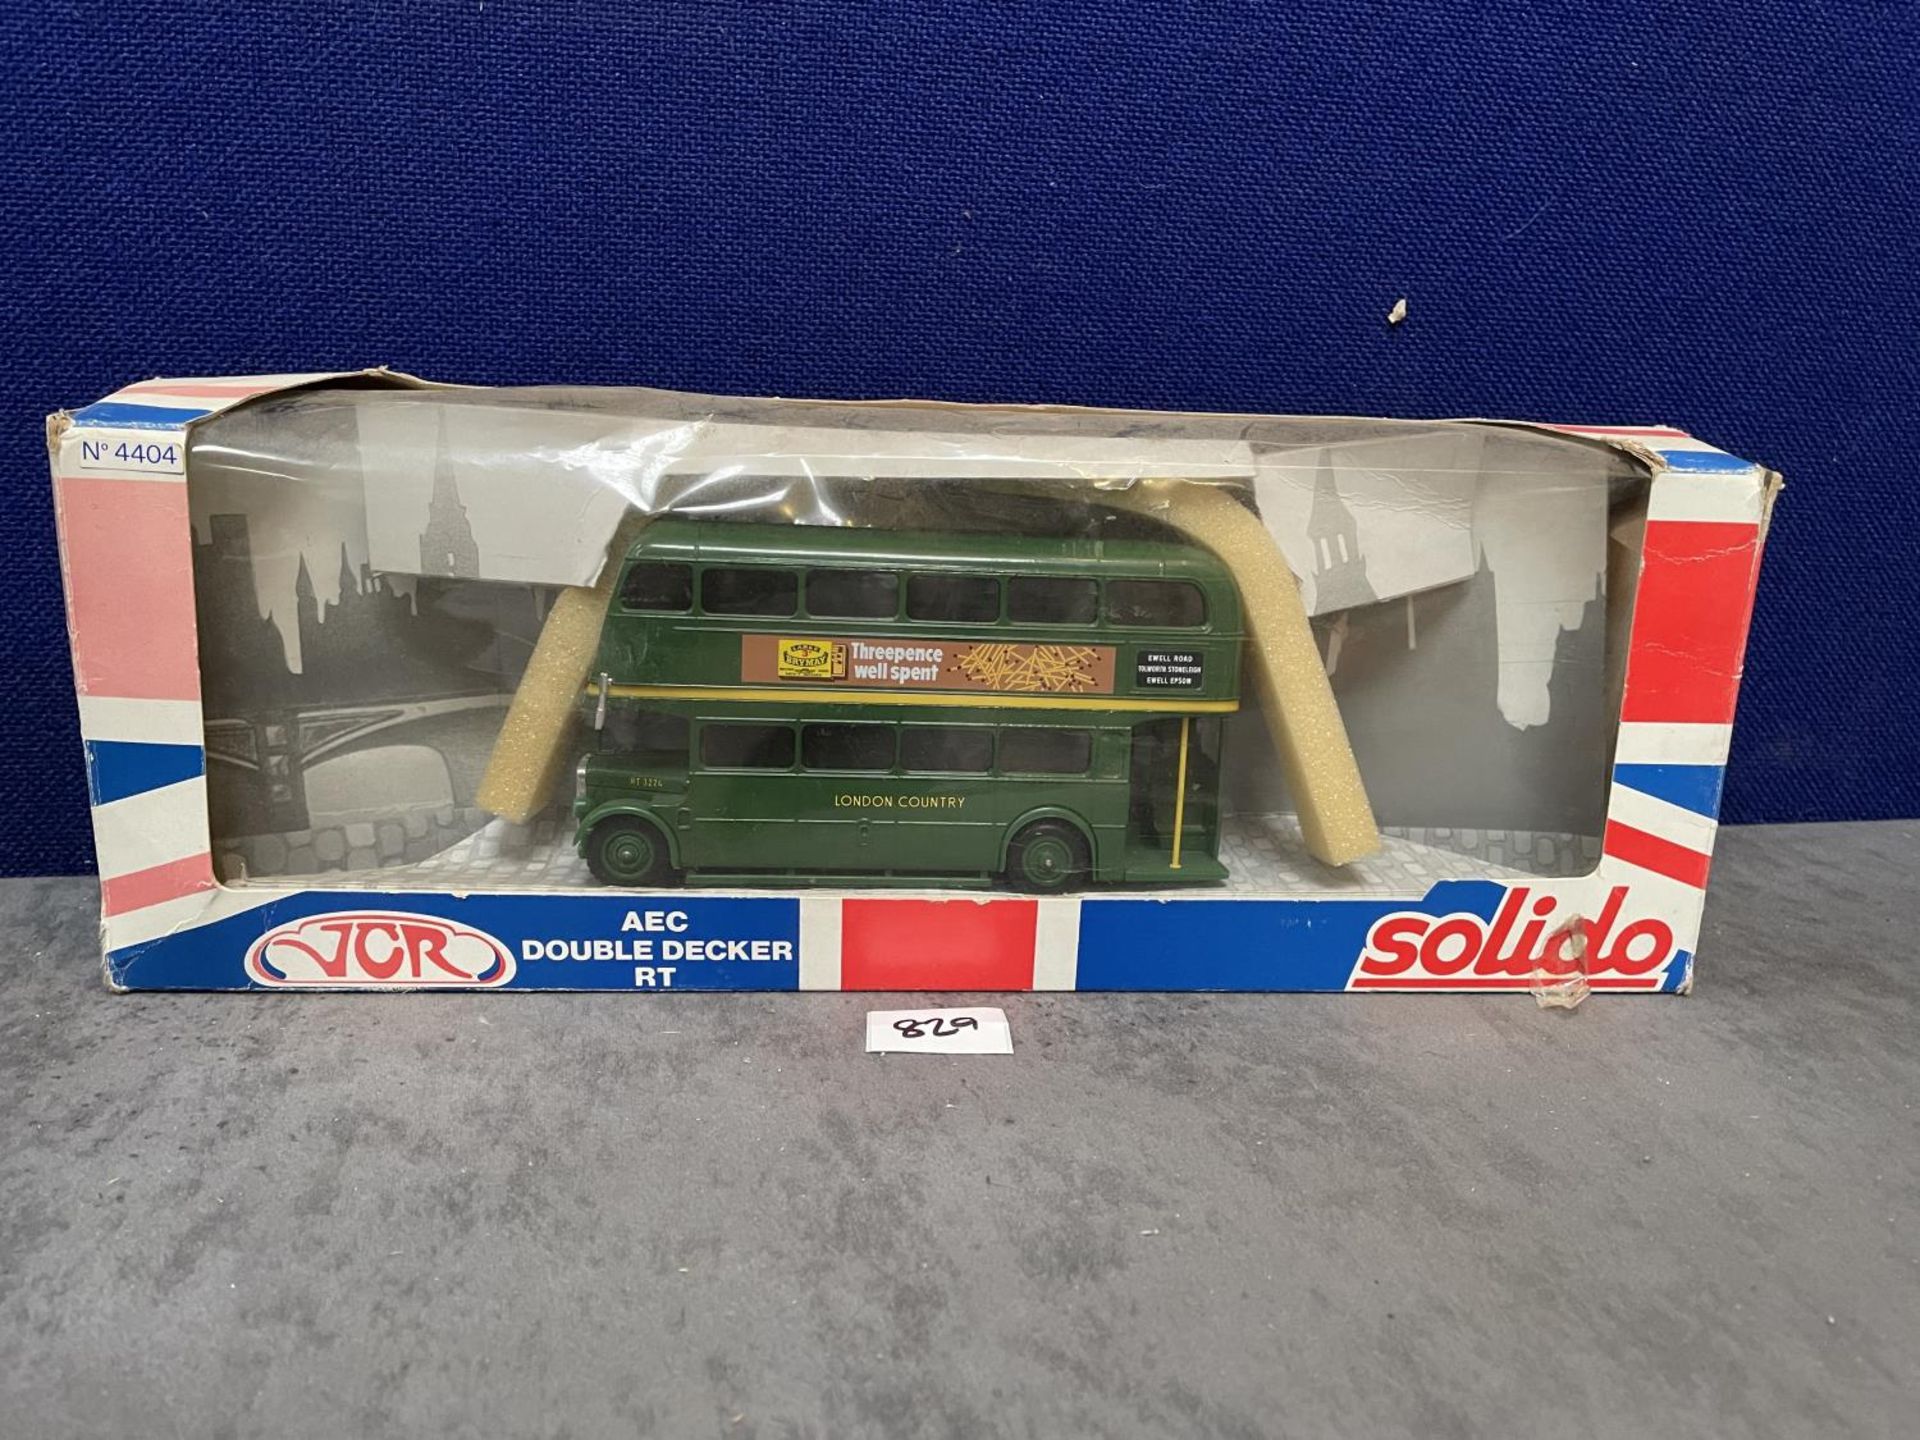 Solido #4404 AEC Double Decker RT London County Brymay Matches Decal In Box